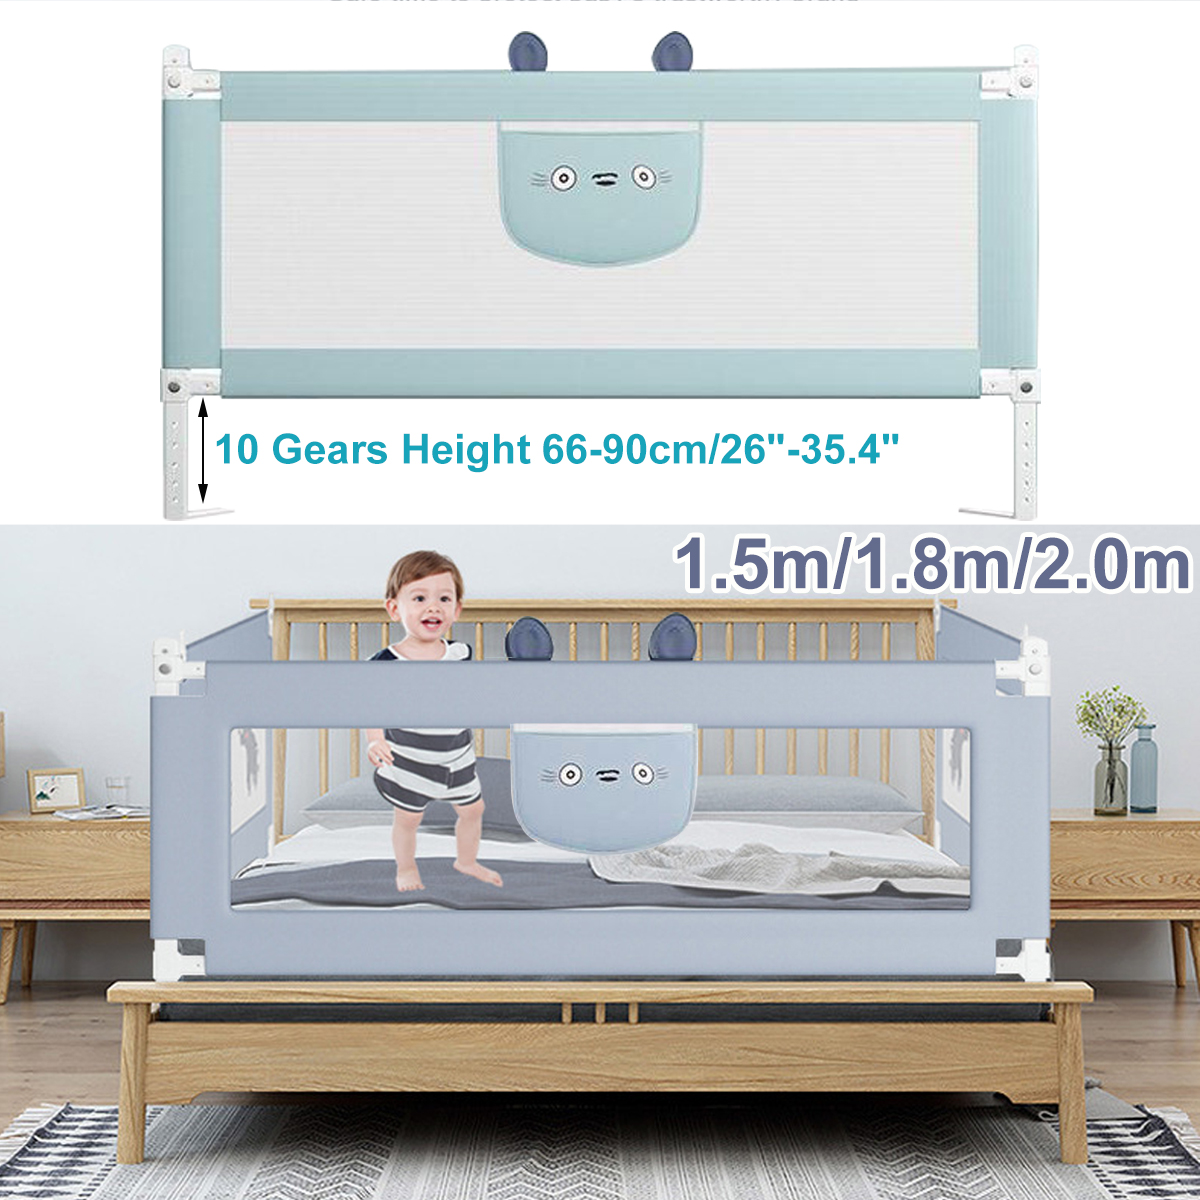 15m18m20m-Adjustable-Folding-Kids-Safety-Bed-RailBedRail-Cot-Guard-Protecte-Child-Toddler-1918099-11